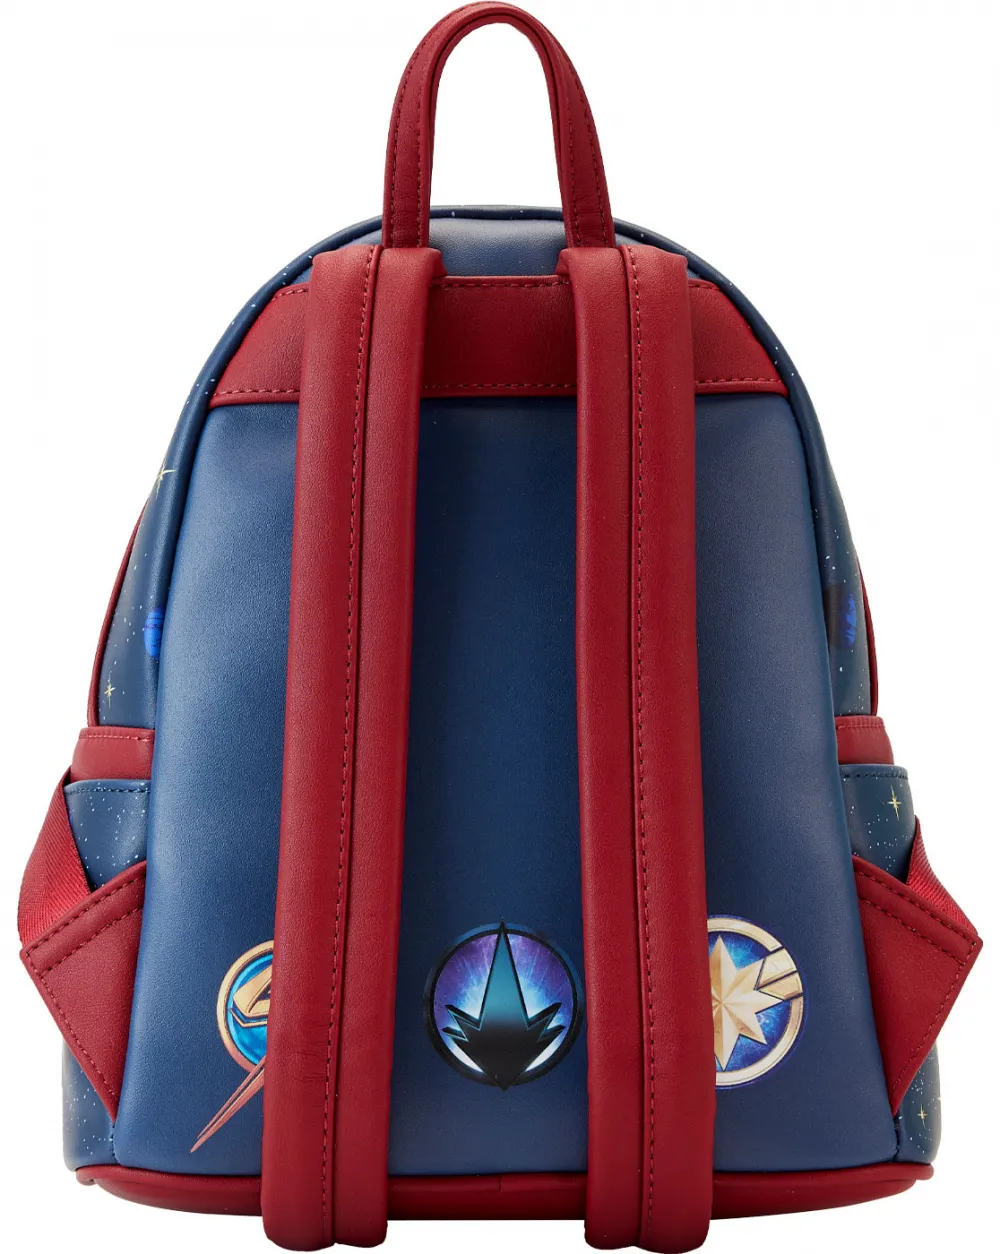 The Marvels Group Mini Backpack Loungefly